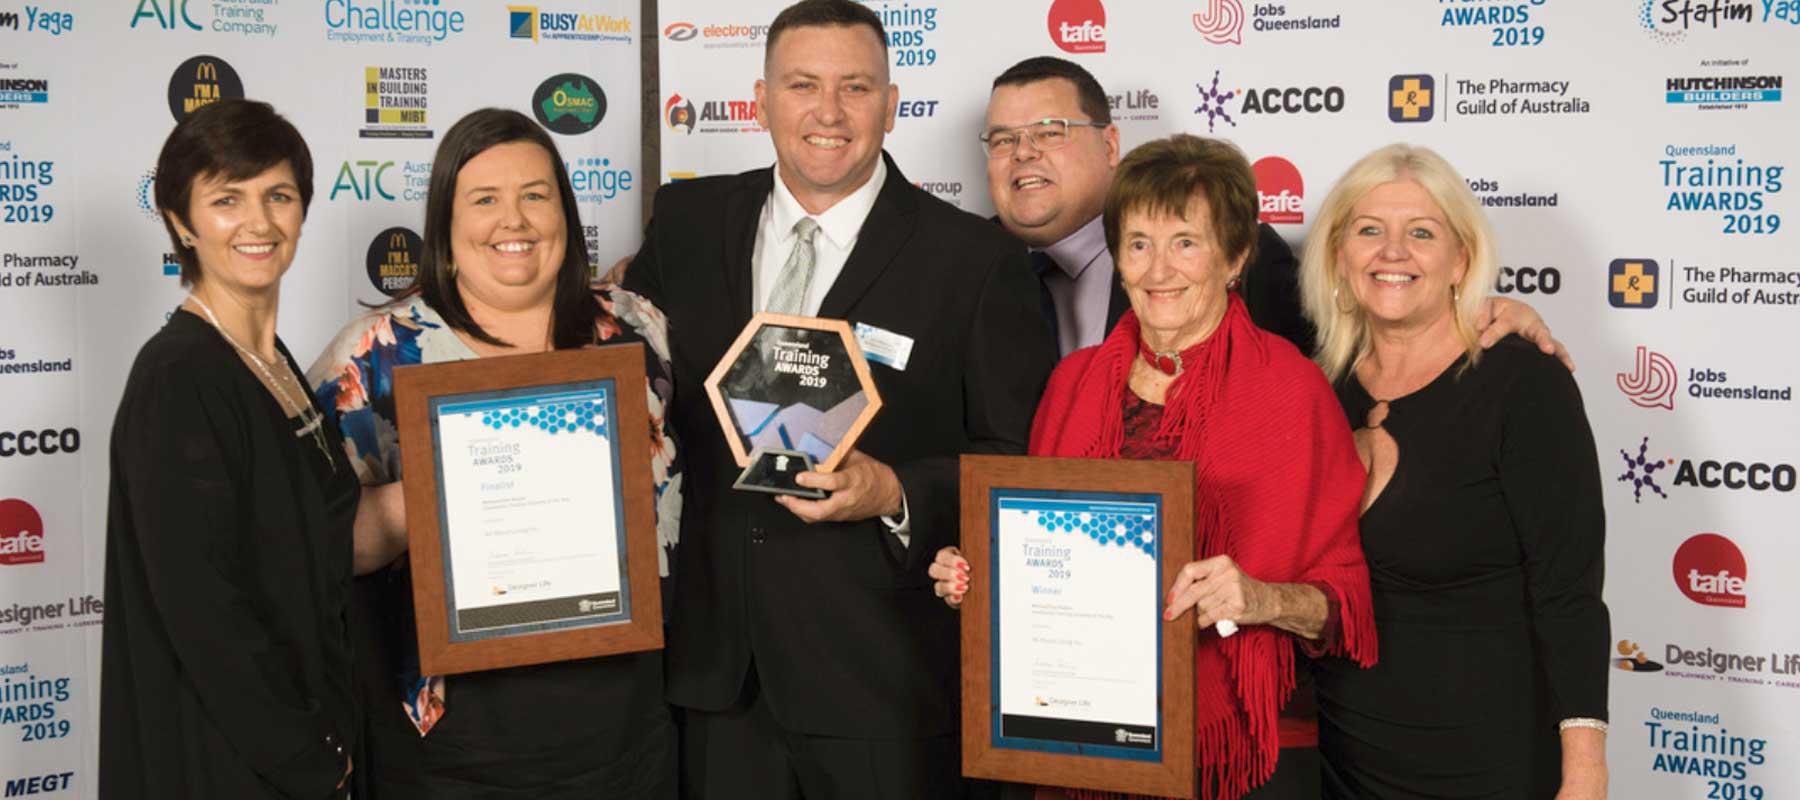 Six All About Living members formally dressed, taking a photo holding three Training Awards 2019 awards